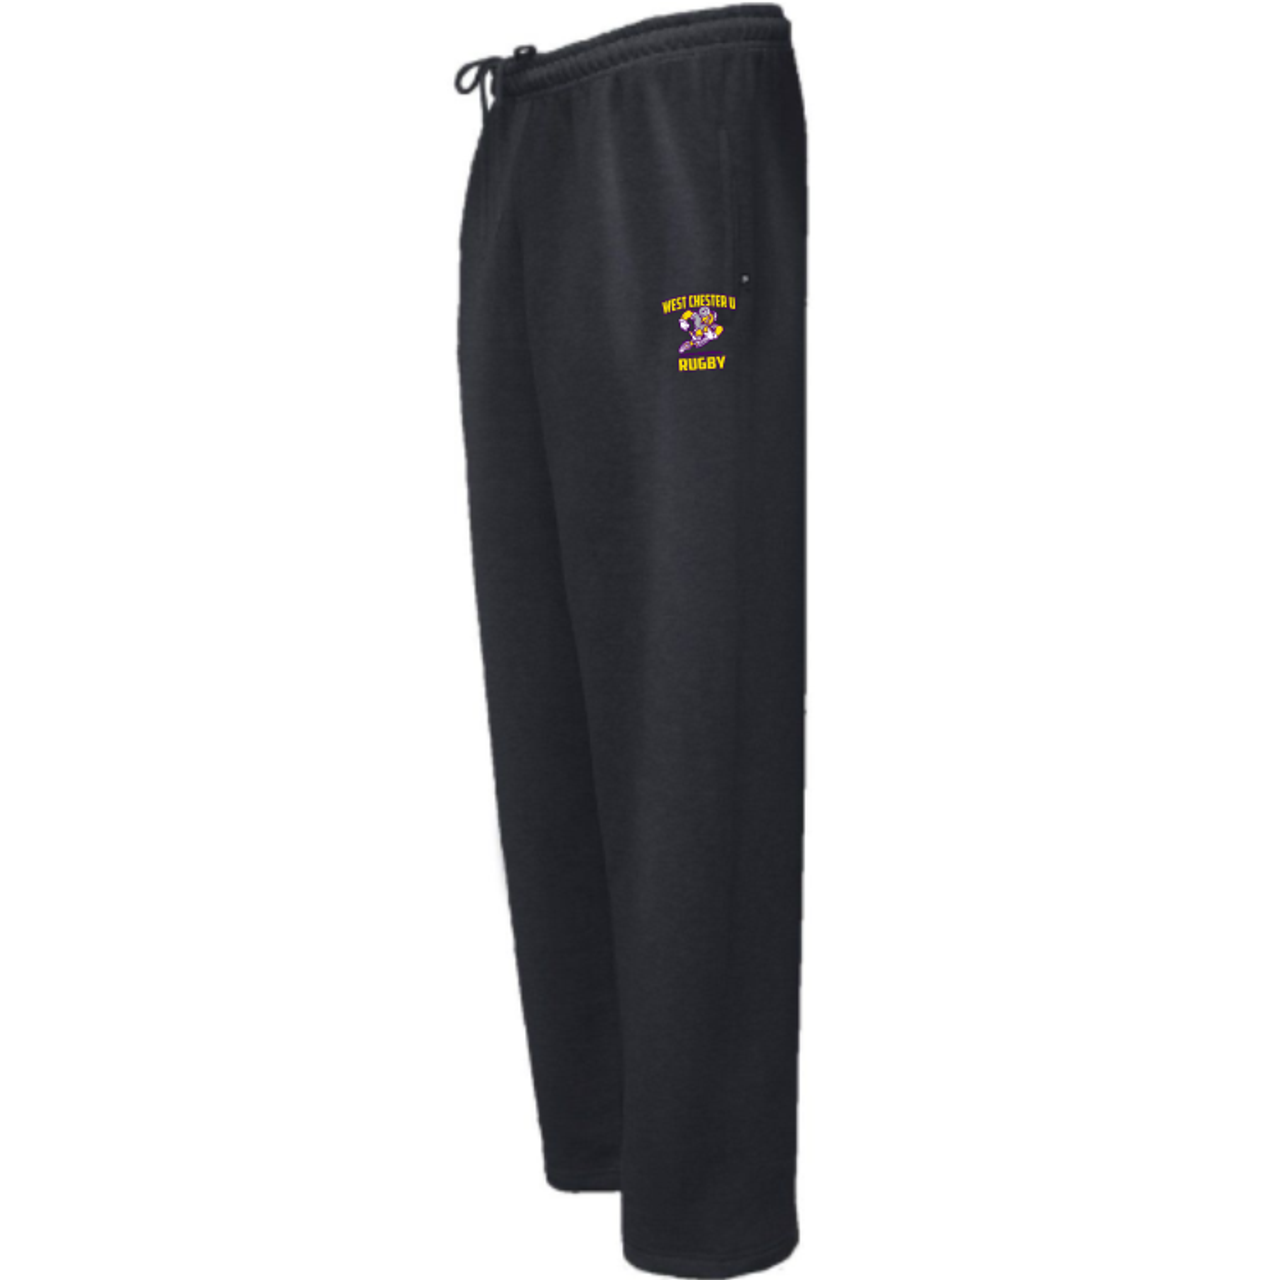 West Chester Rugby Sweatpant, Black